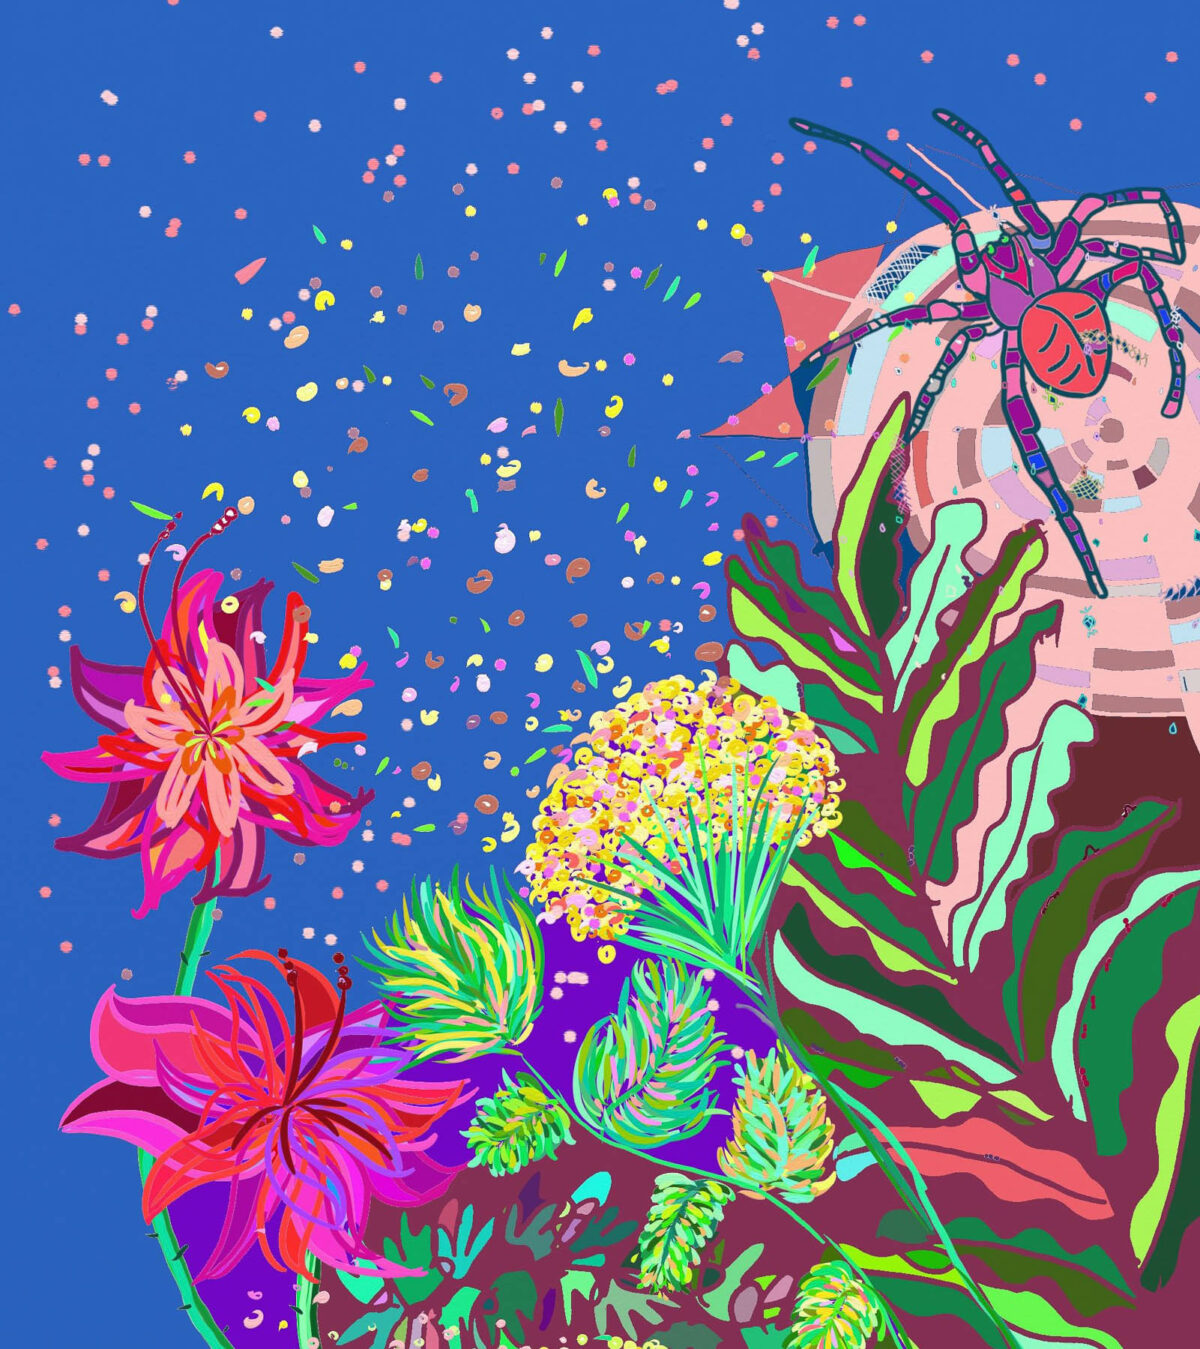 An illustration of colourful flowers with a large spider.